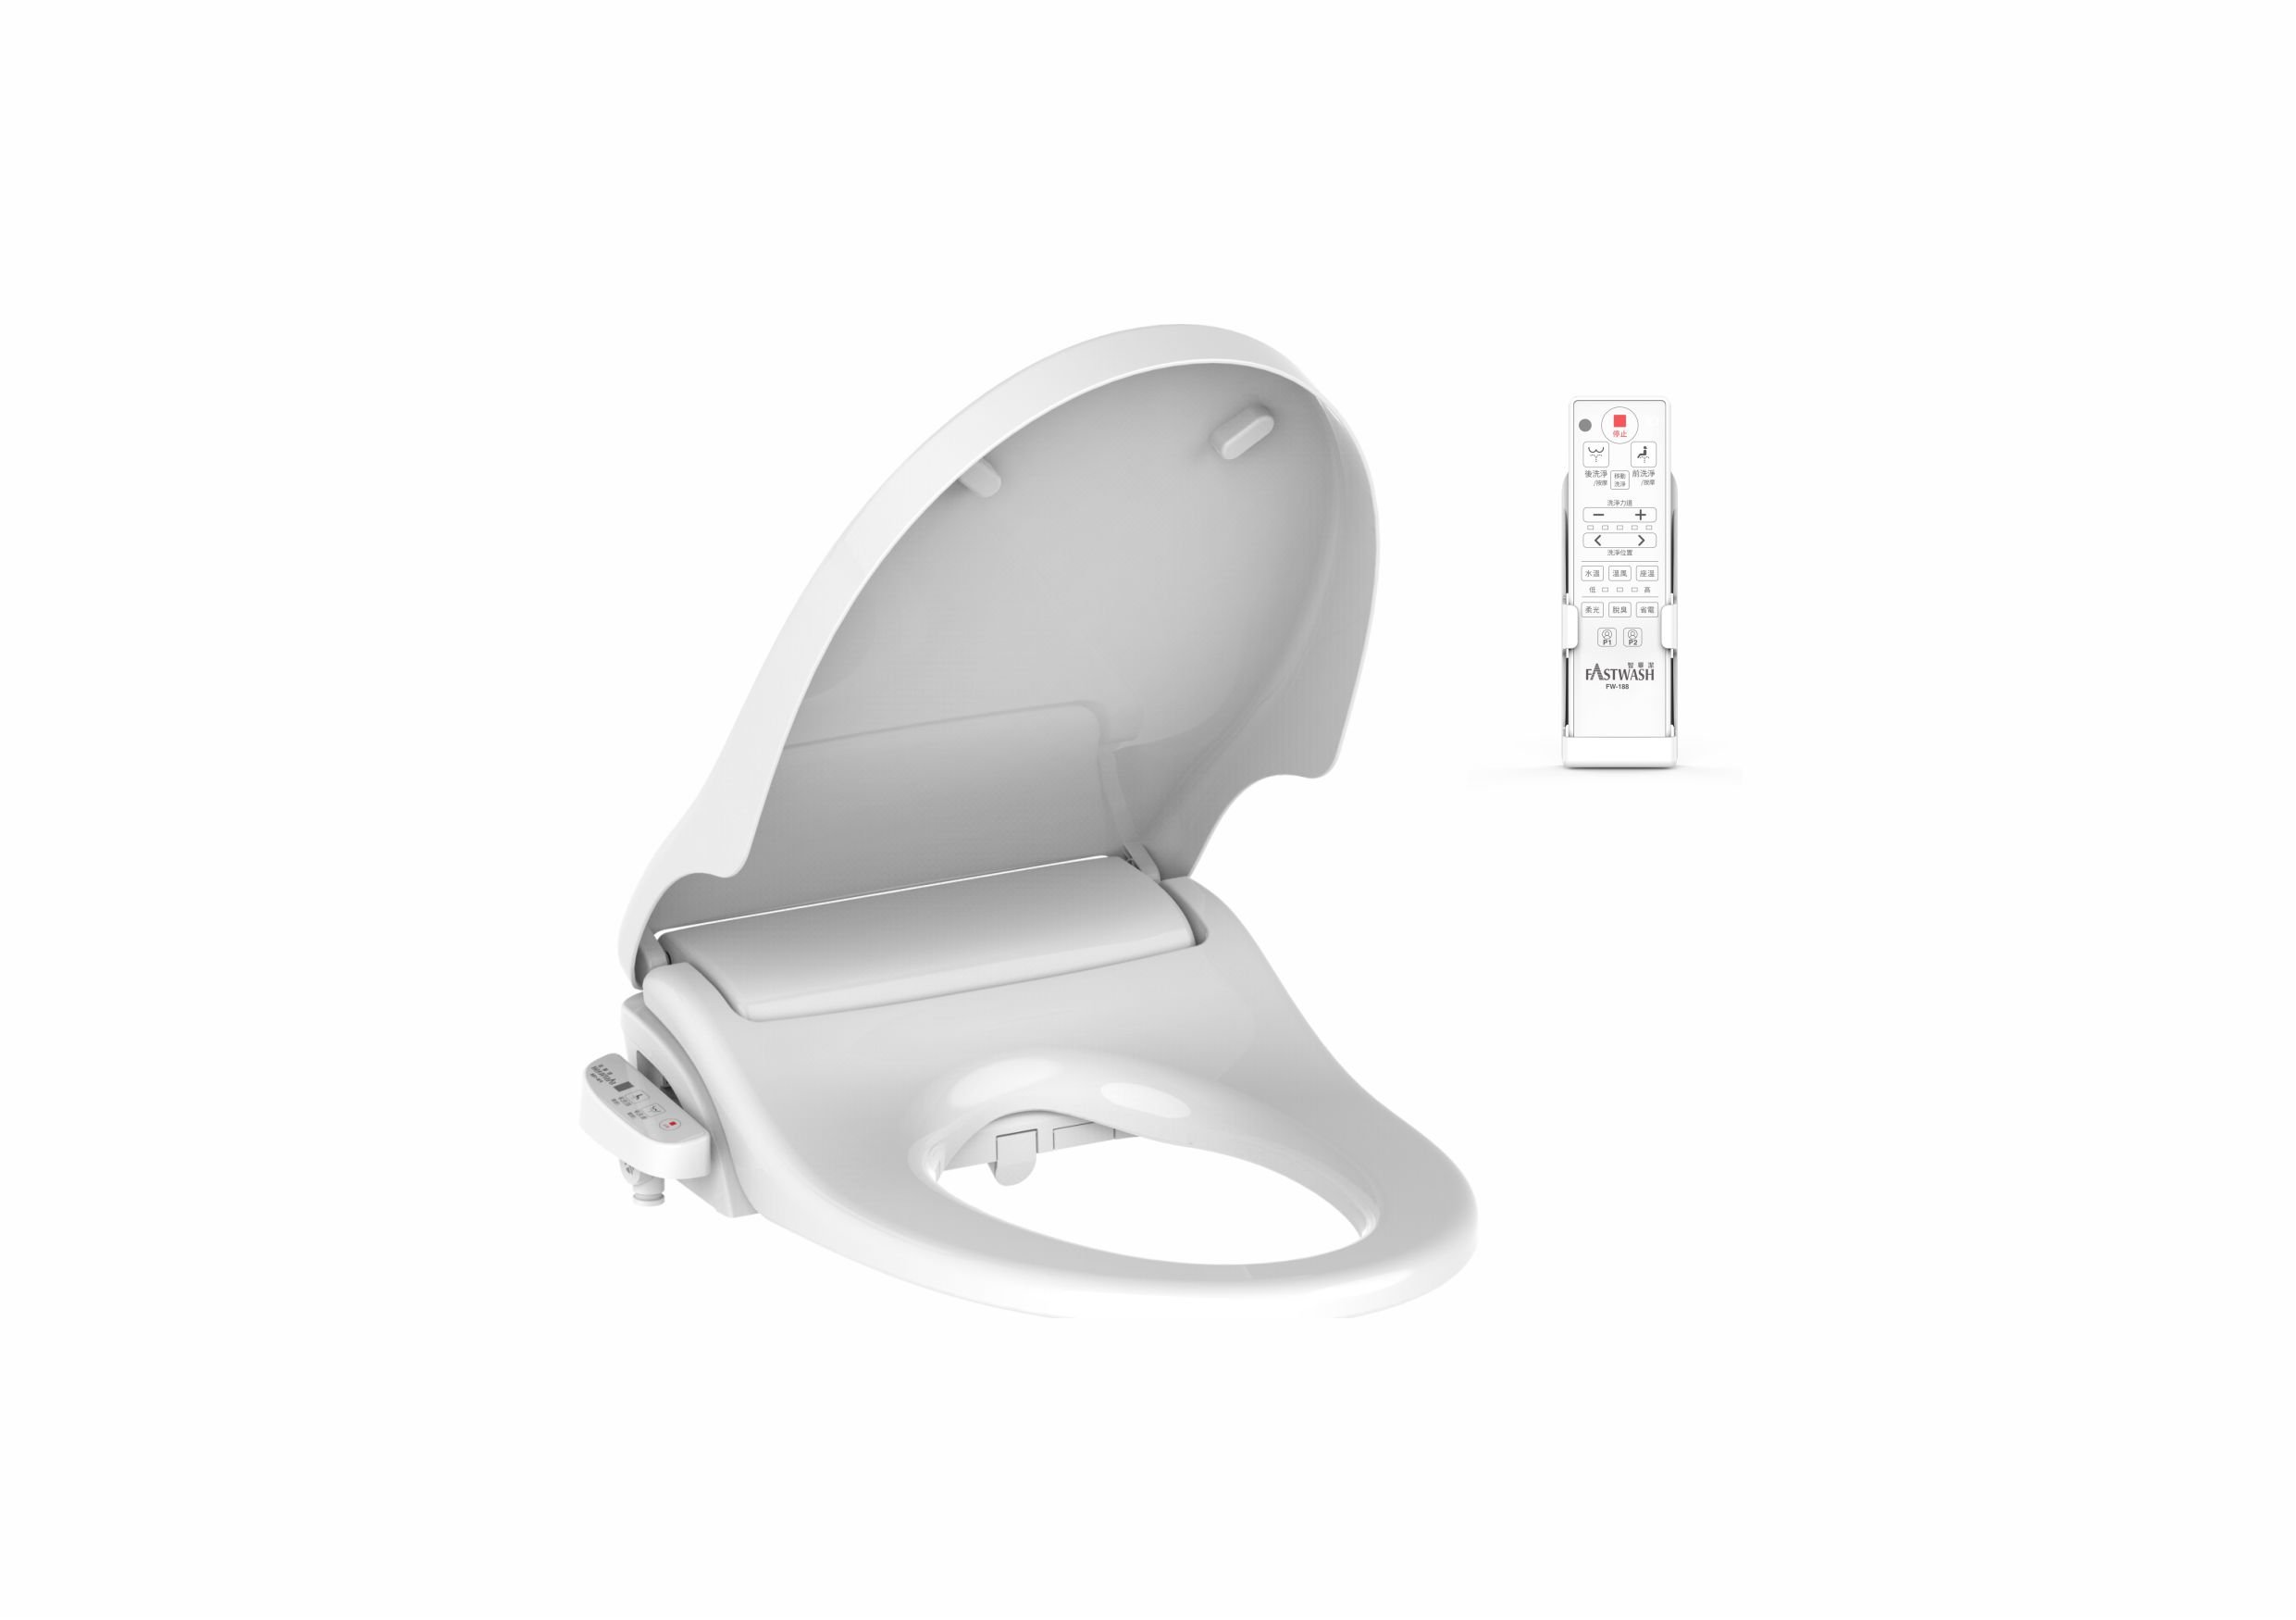  Energy-Saving, Safety Protection, and Other Features of our Bidet